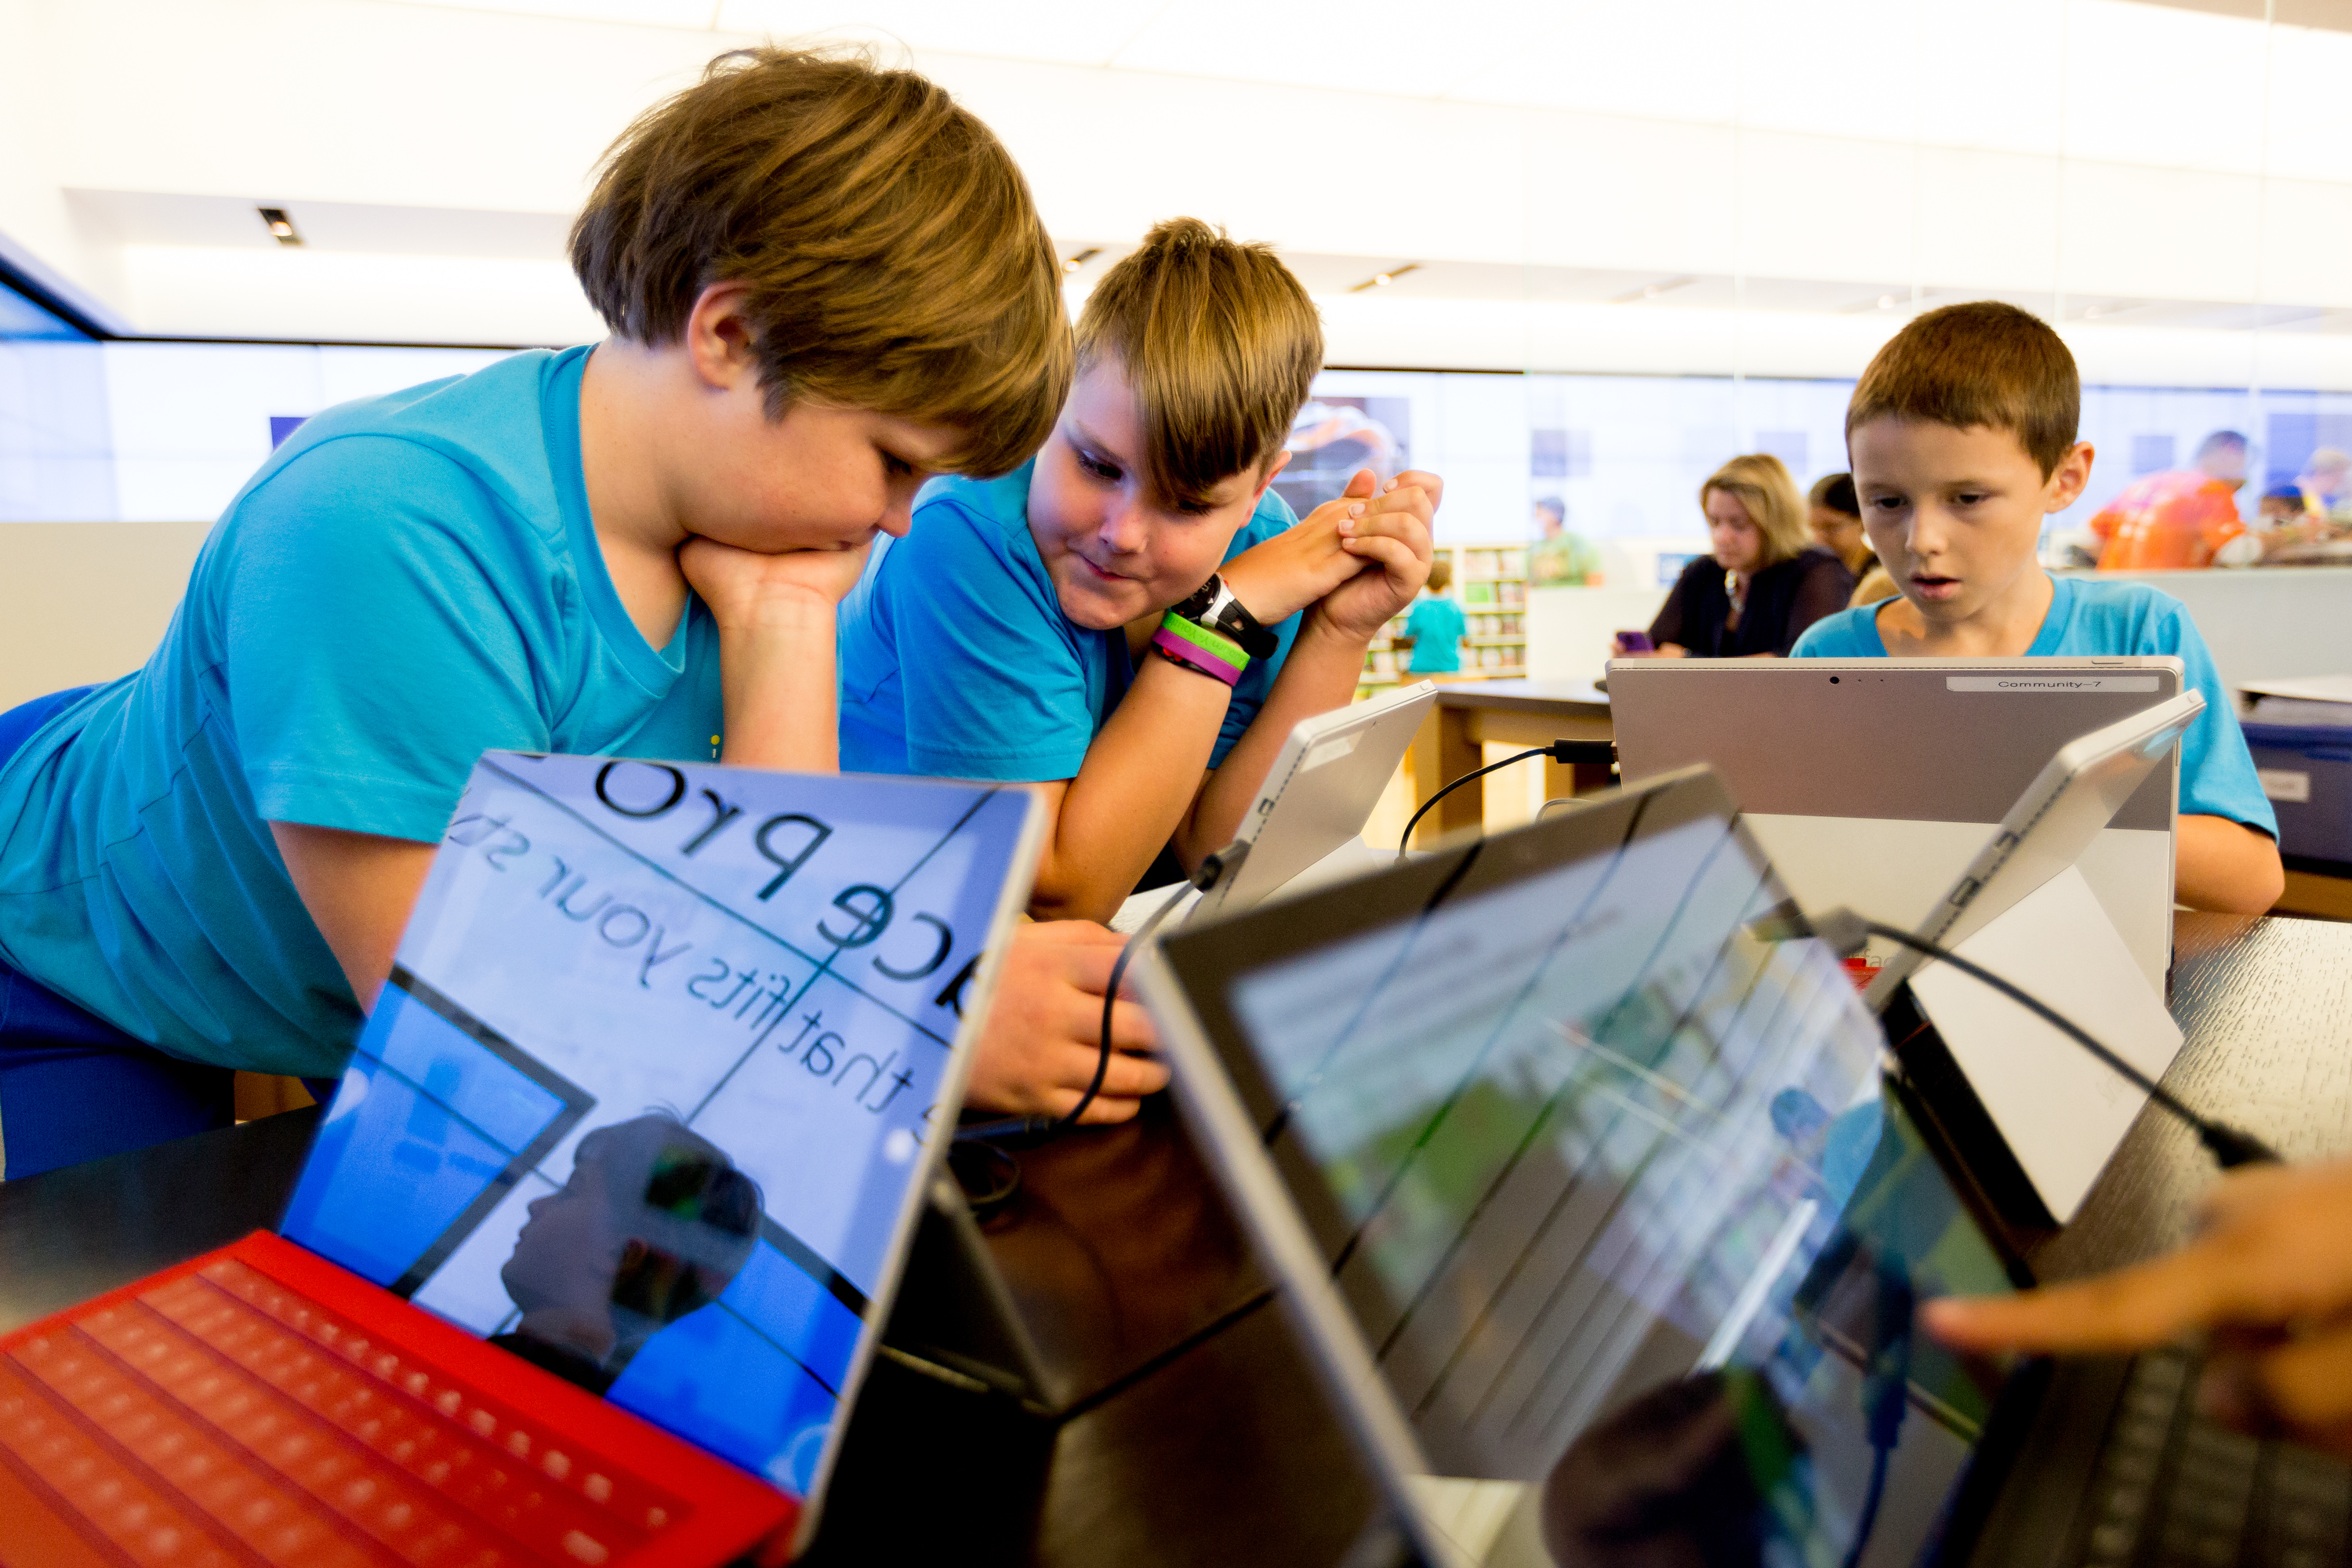 Brothers Robert Wallace, 9, left, and Charles Wallace, 11, team up as they work to learn coding, along with Kayden Barnard, 9, right, at the YouthSpark Summer Camp at Microsoft at Bellevue Square Mall in Bellevue, Washington. Photo credit: Scott Eklund, Red Box Pictures.